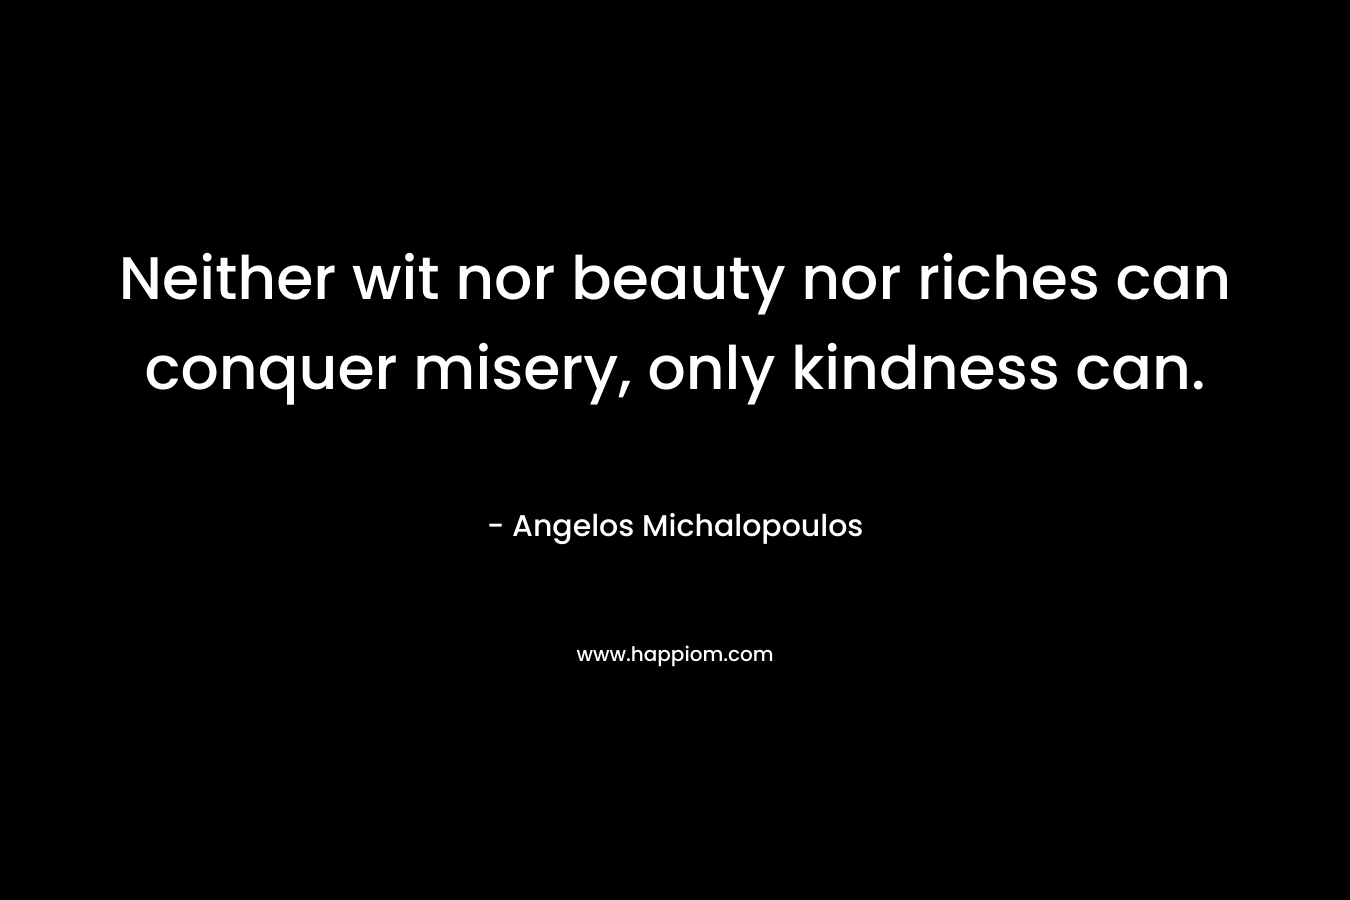 Neither wit nor beauty nor riches can conquer misery, only kindness can. – Angelos Michalopoulos